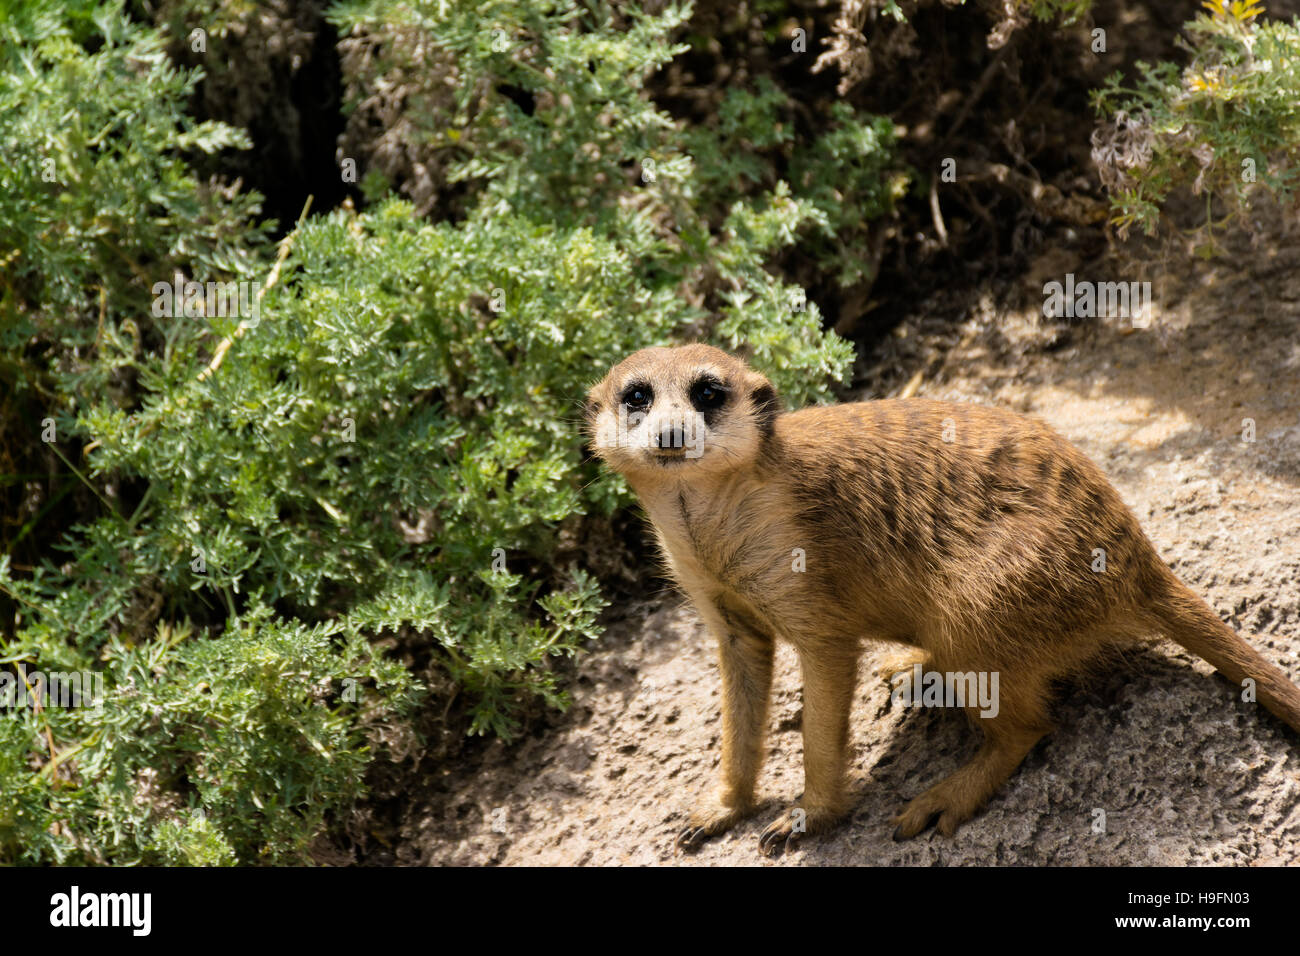 A curious meerkat looking straigt at the camera Stock Photo